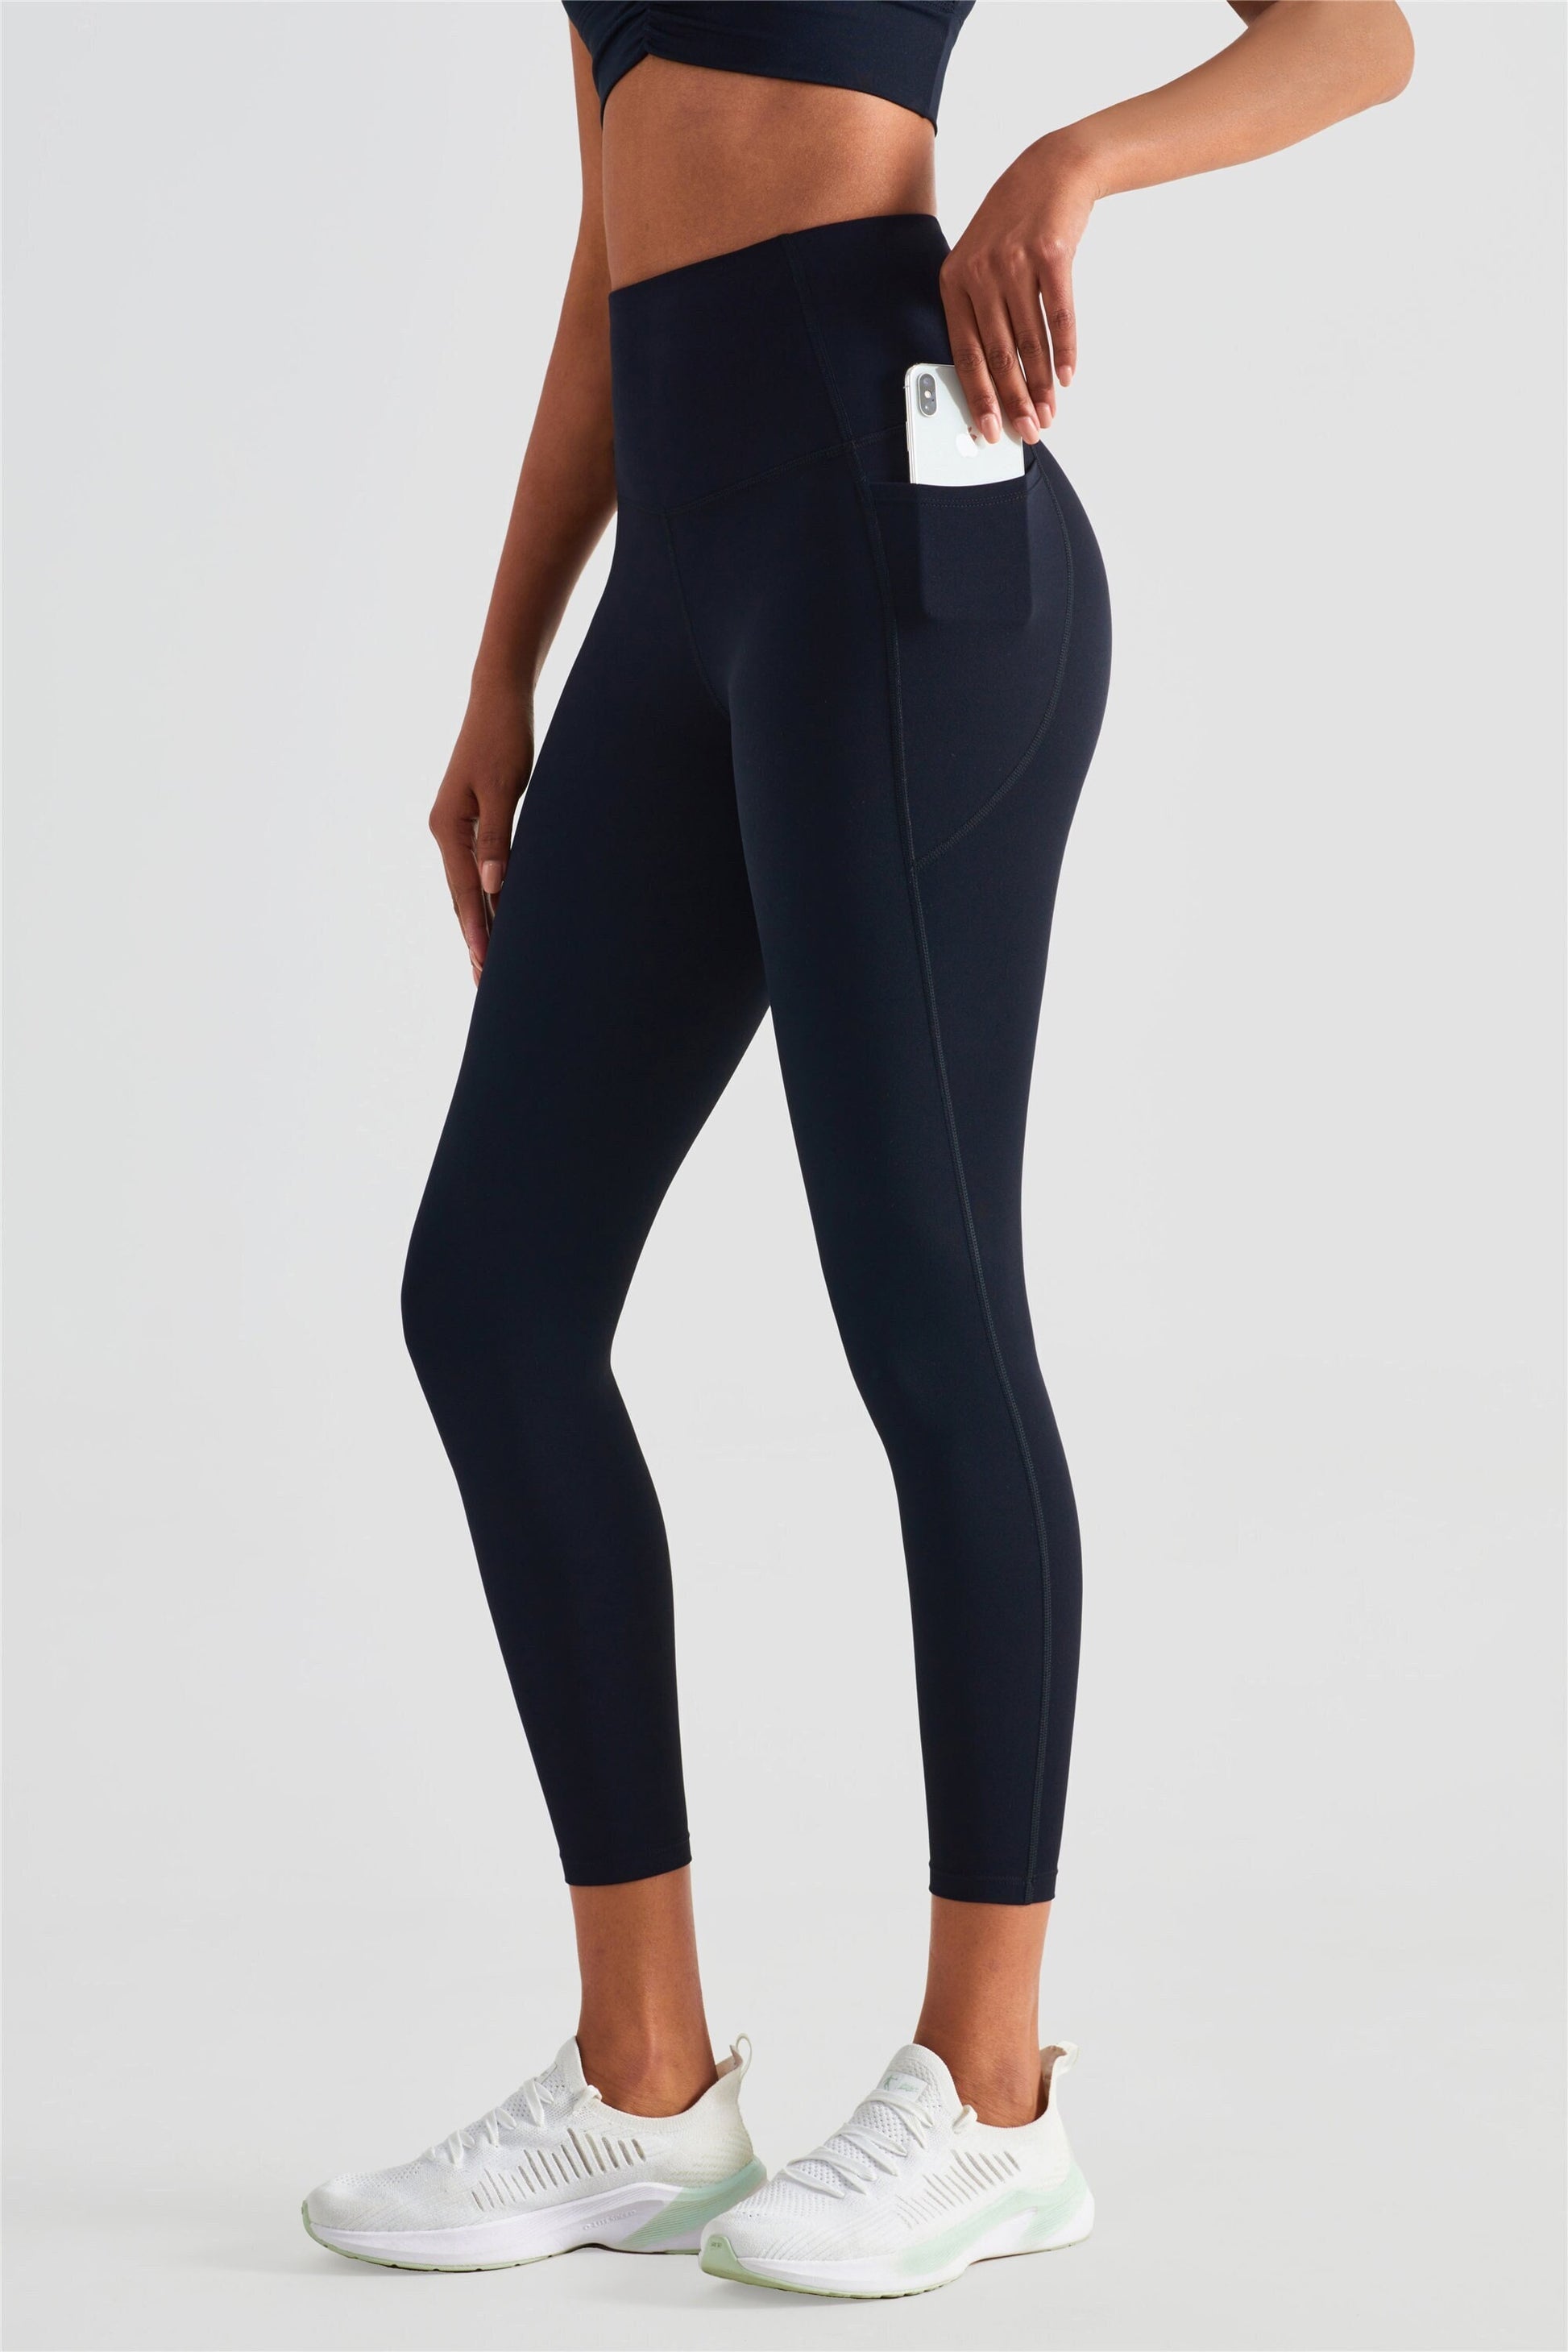 High Waisted Yoga Pants for Women with Pockets Leggings for Women